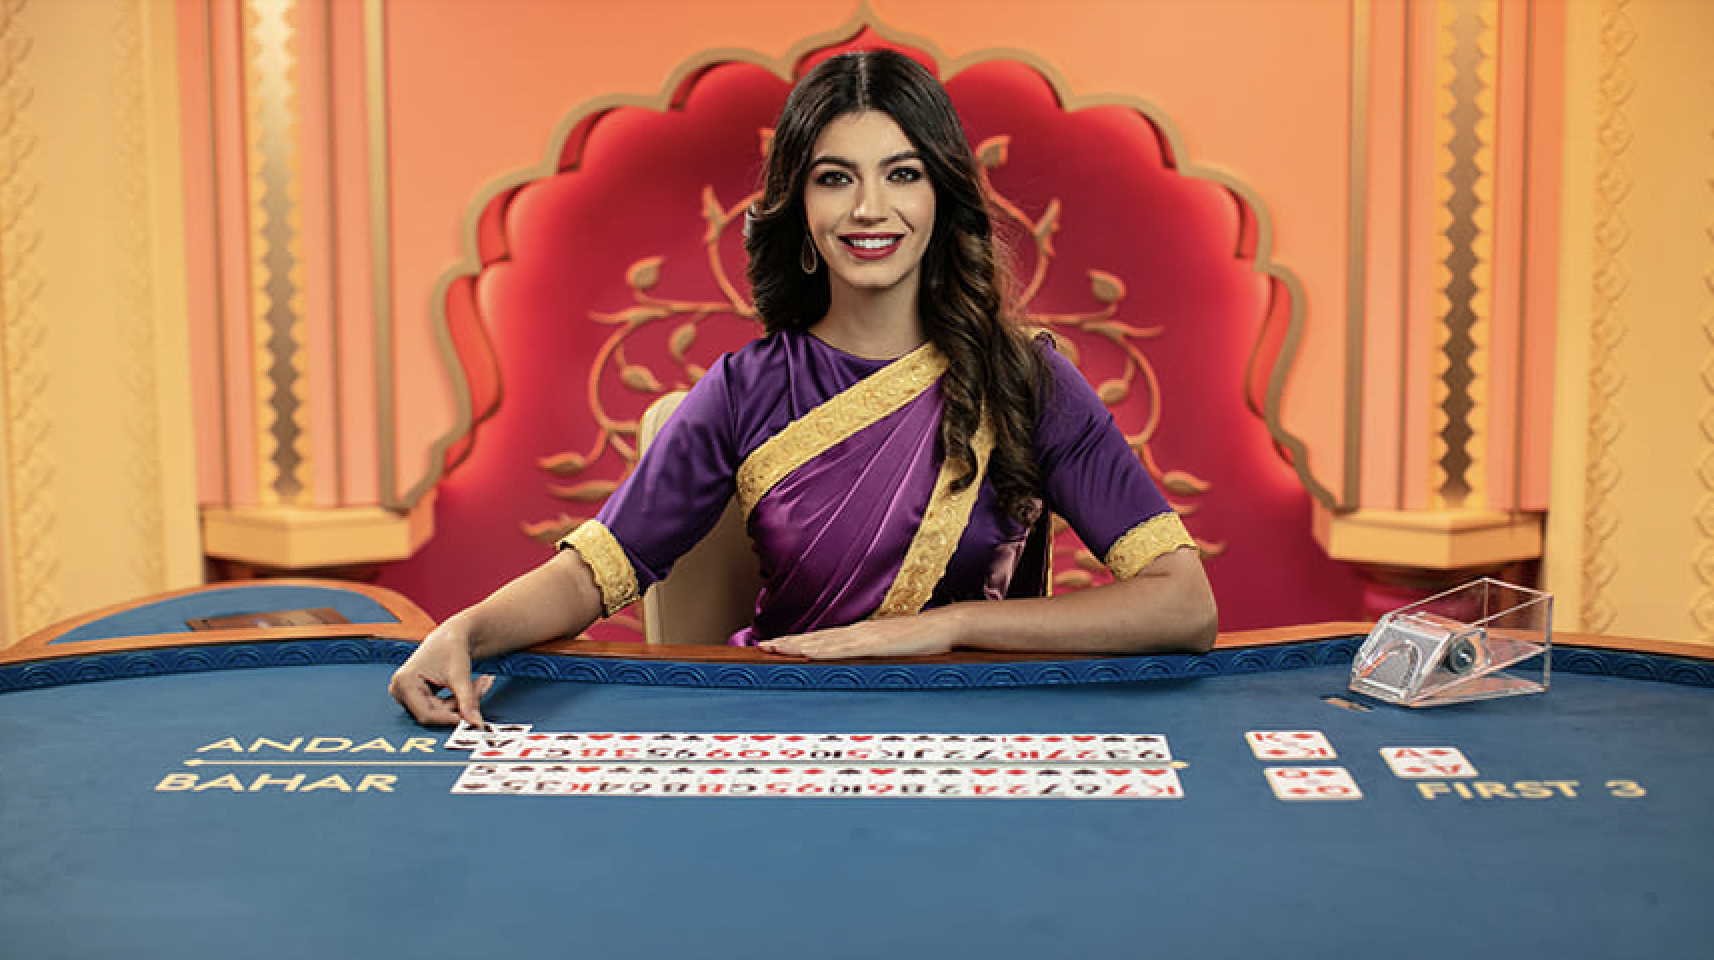 Andar Bahar is a Live Casino Game Provided by the Vendor Partner Pragmatic Play - GamingSoft